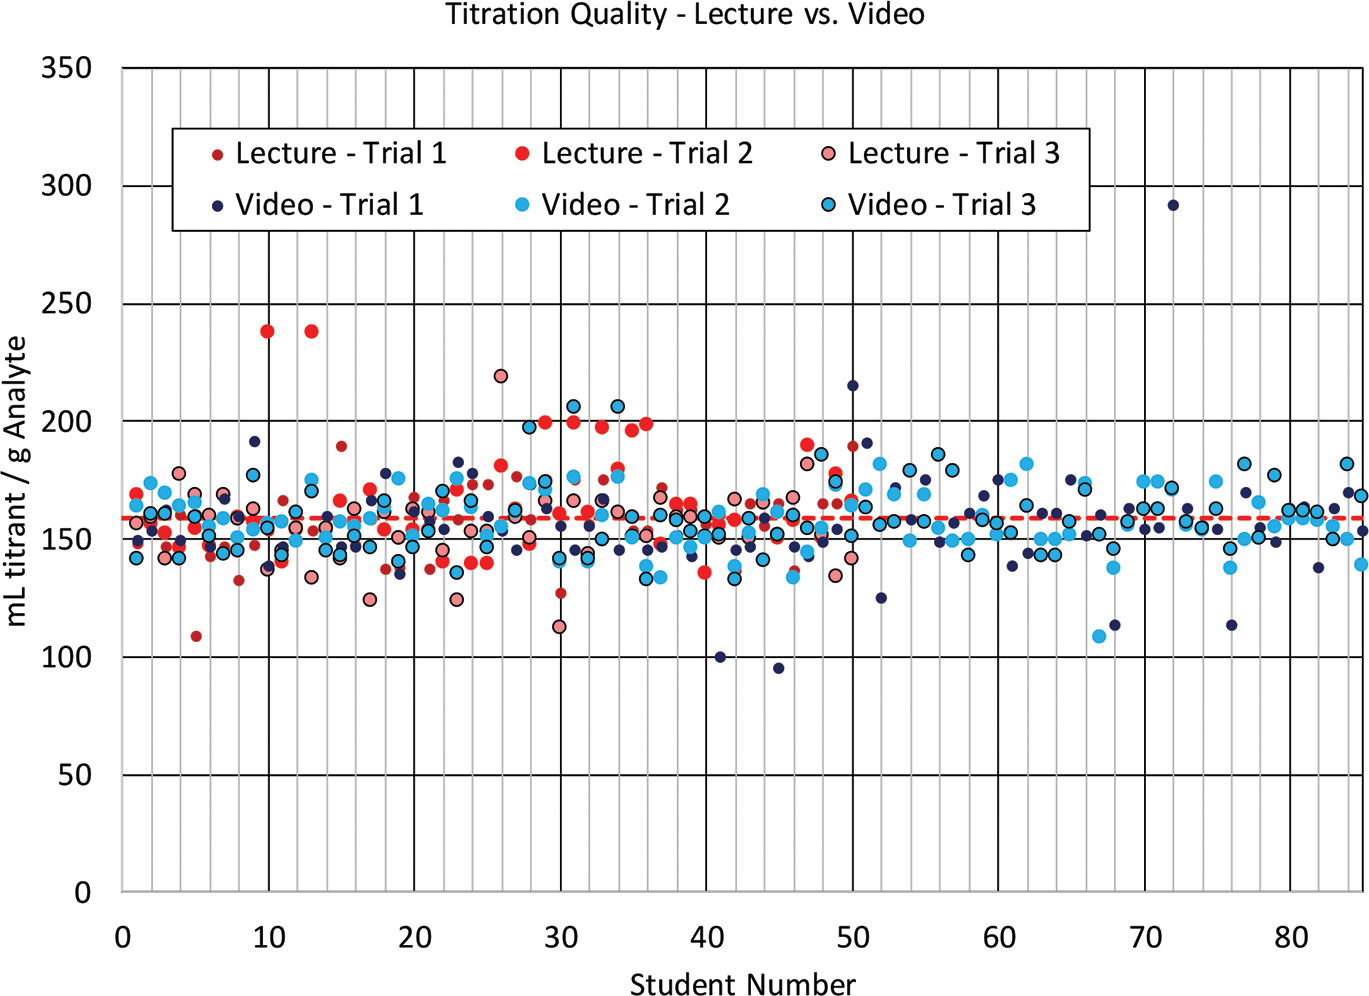 Student data for both lecture- and video-based cohorts. Visual emphasis is lower for first titration attempts (no border, smaller size) and emphasized for the final attempt (bold border, larger marker size).